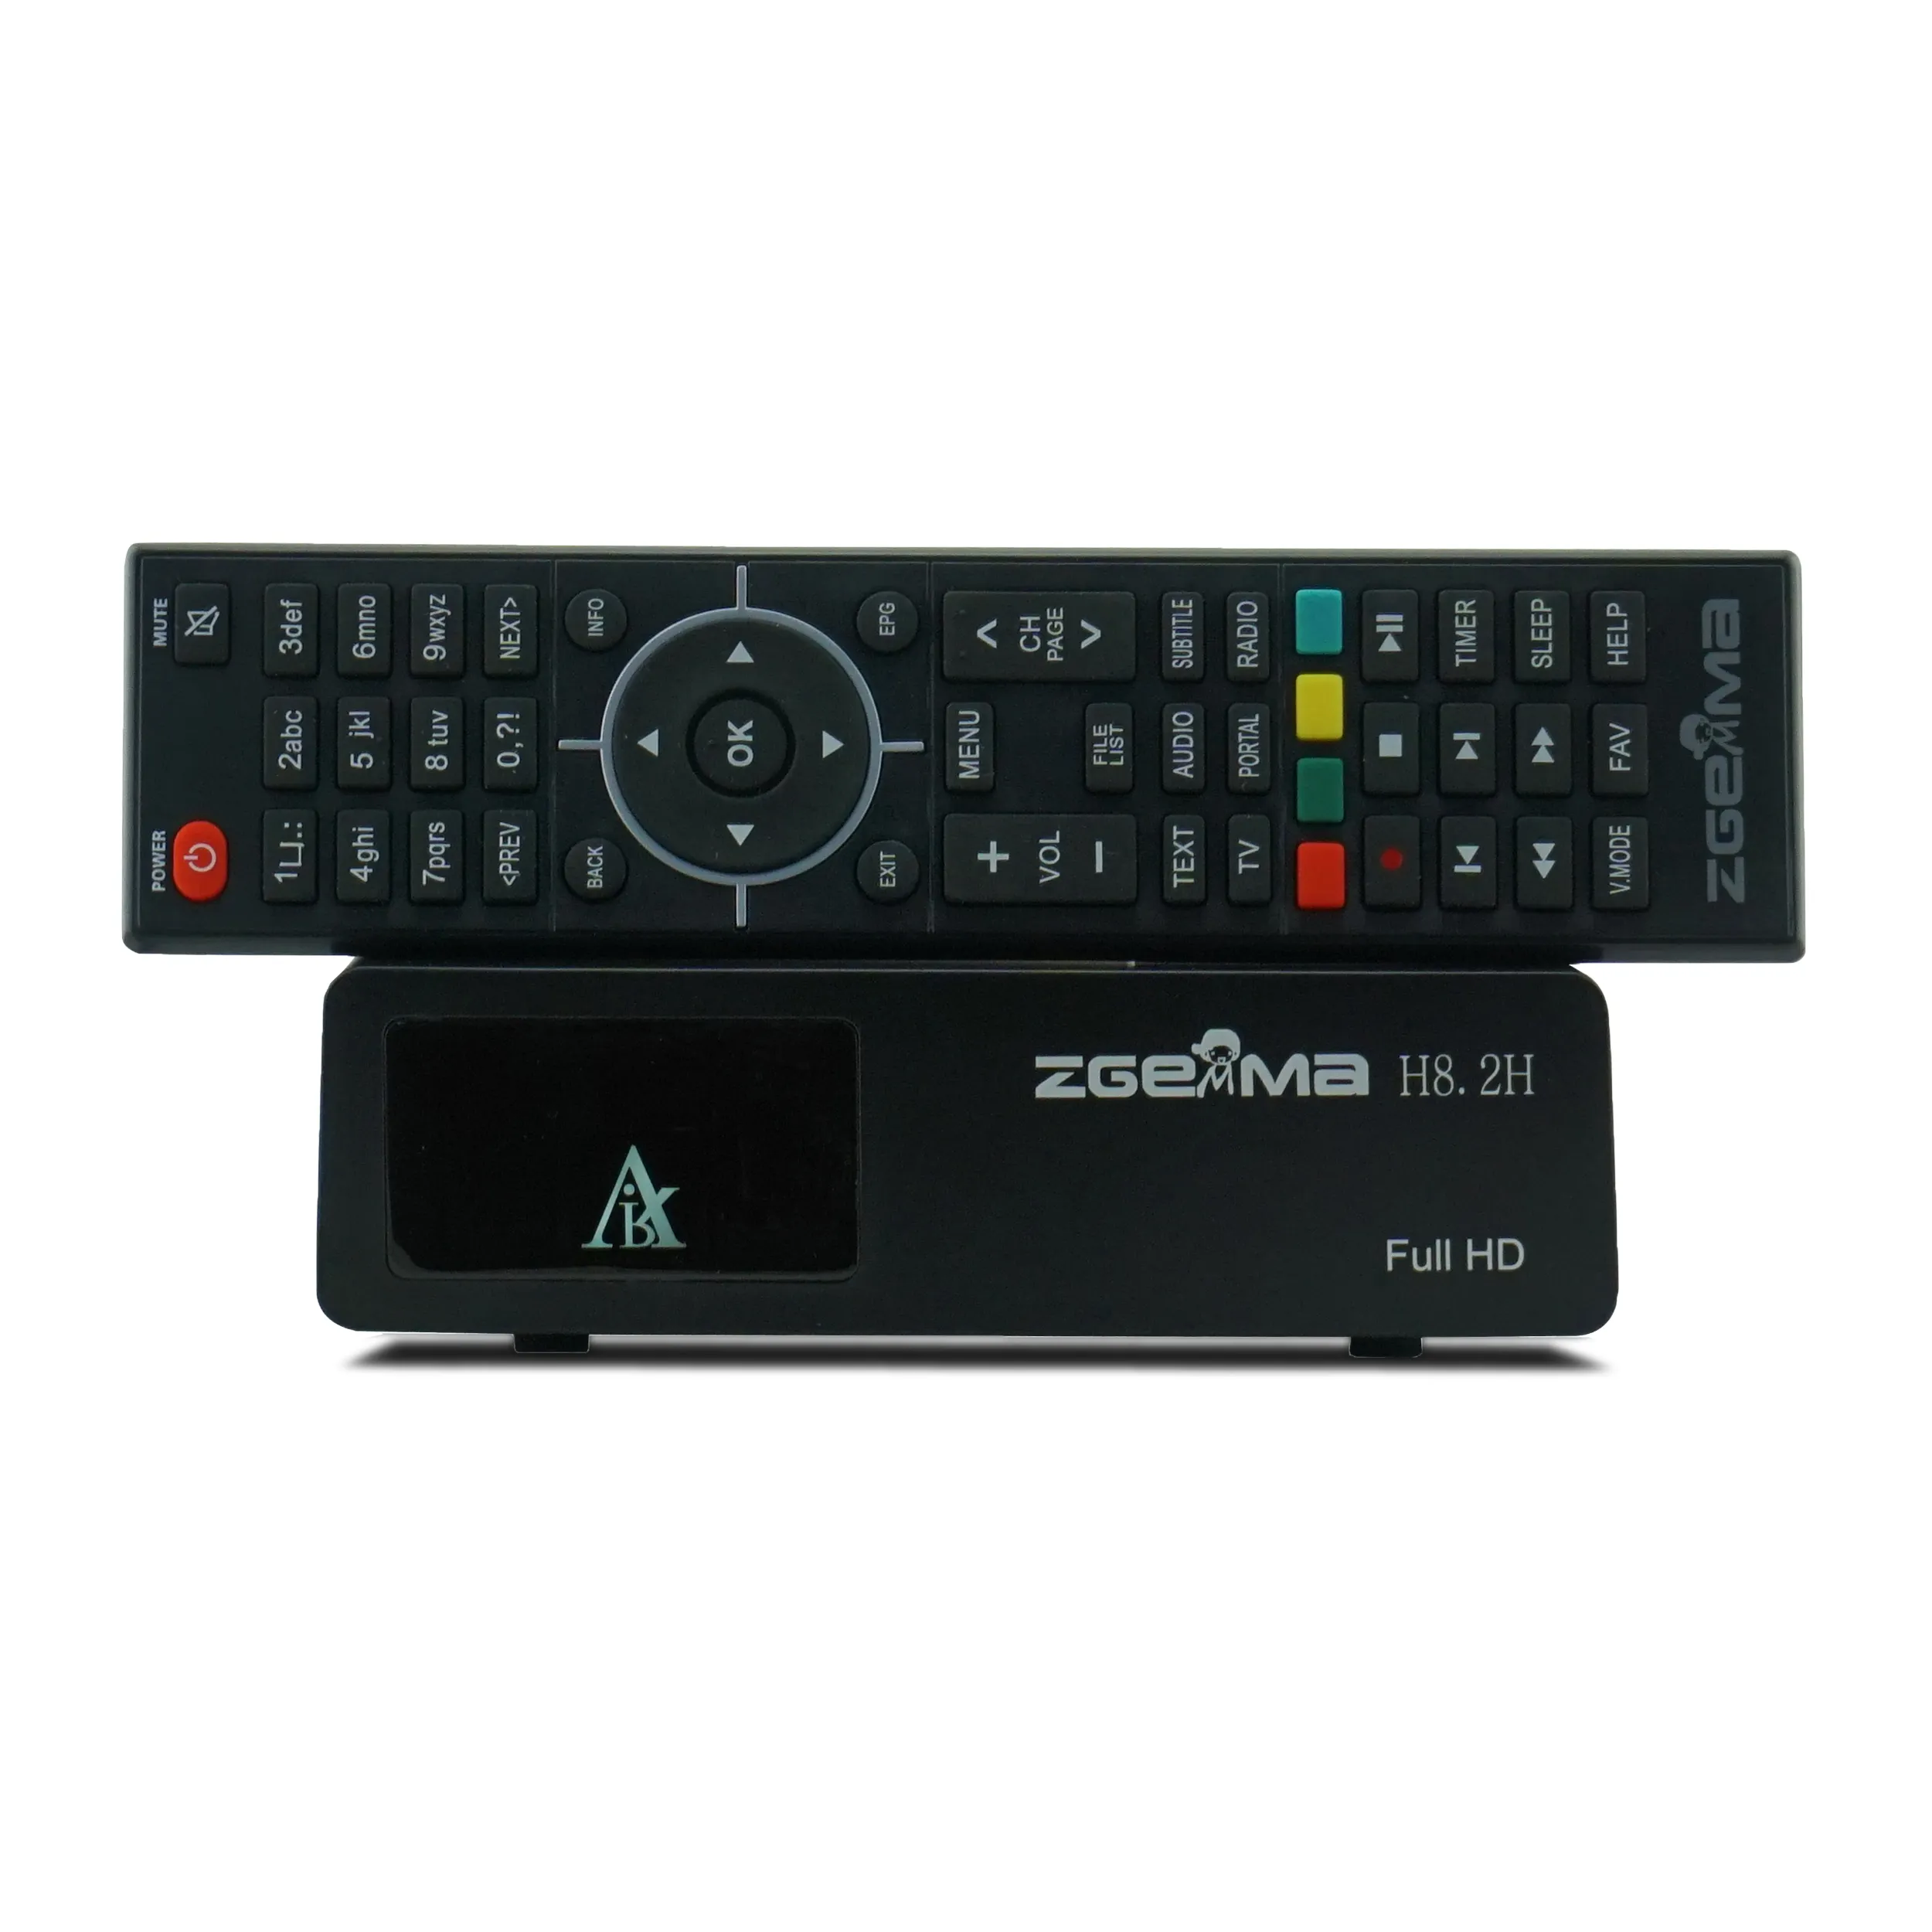 Satellite Tv Decoder H8.2H DVB-S2X + DVB-T2/C Combo Tuner built-in Enigma2 Linux Operating System Usb Wifi Support